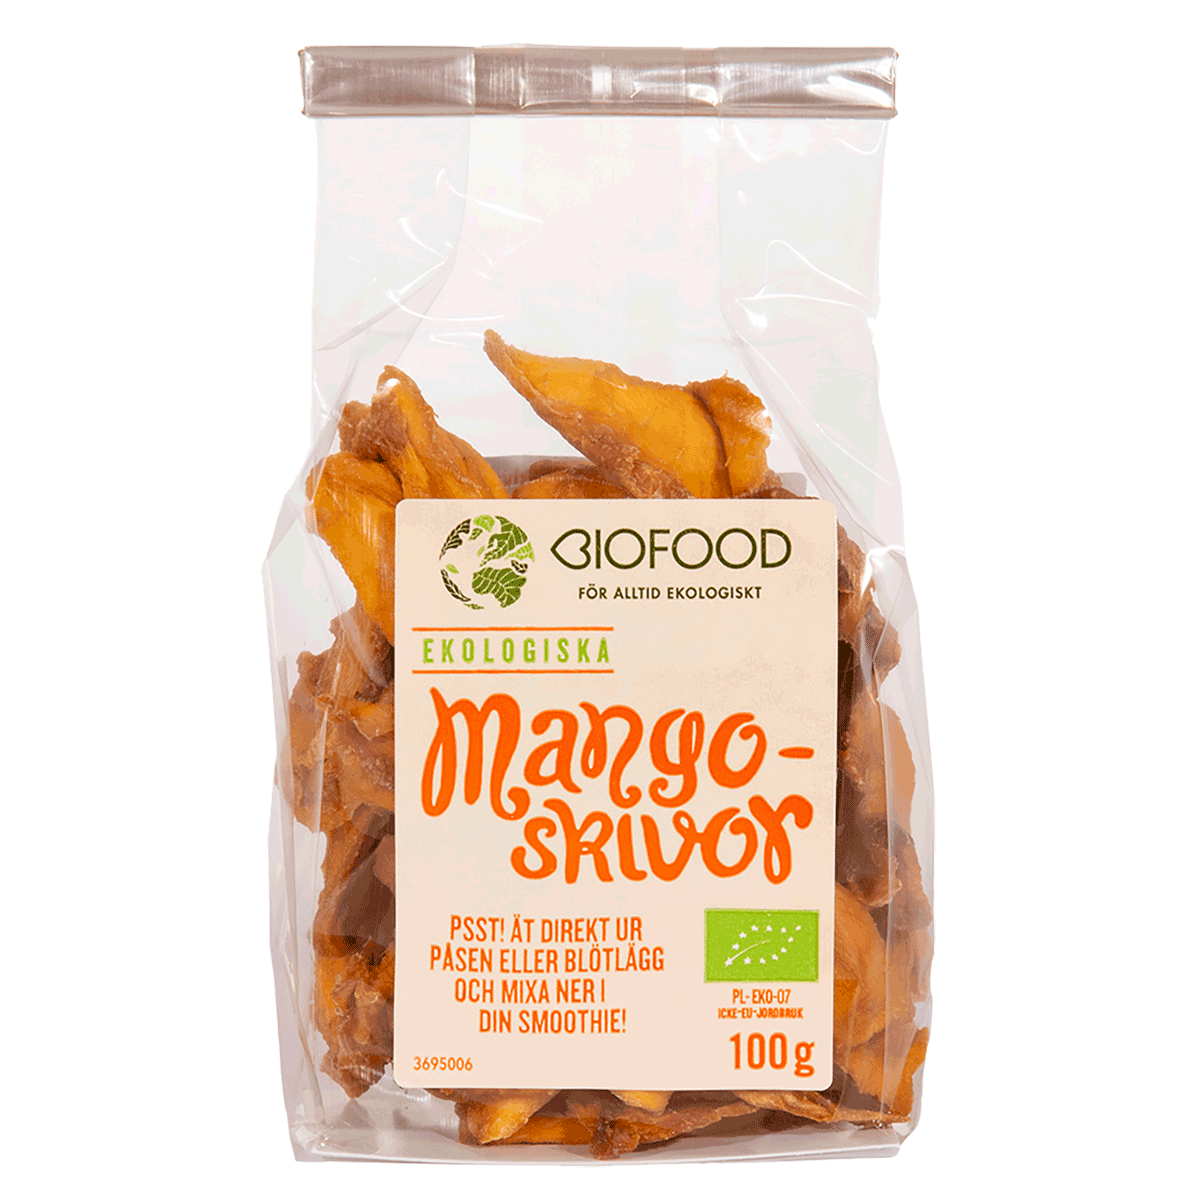 Mango slices dried from Biofood